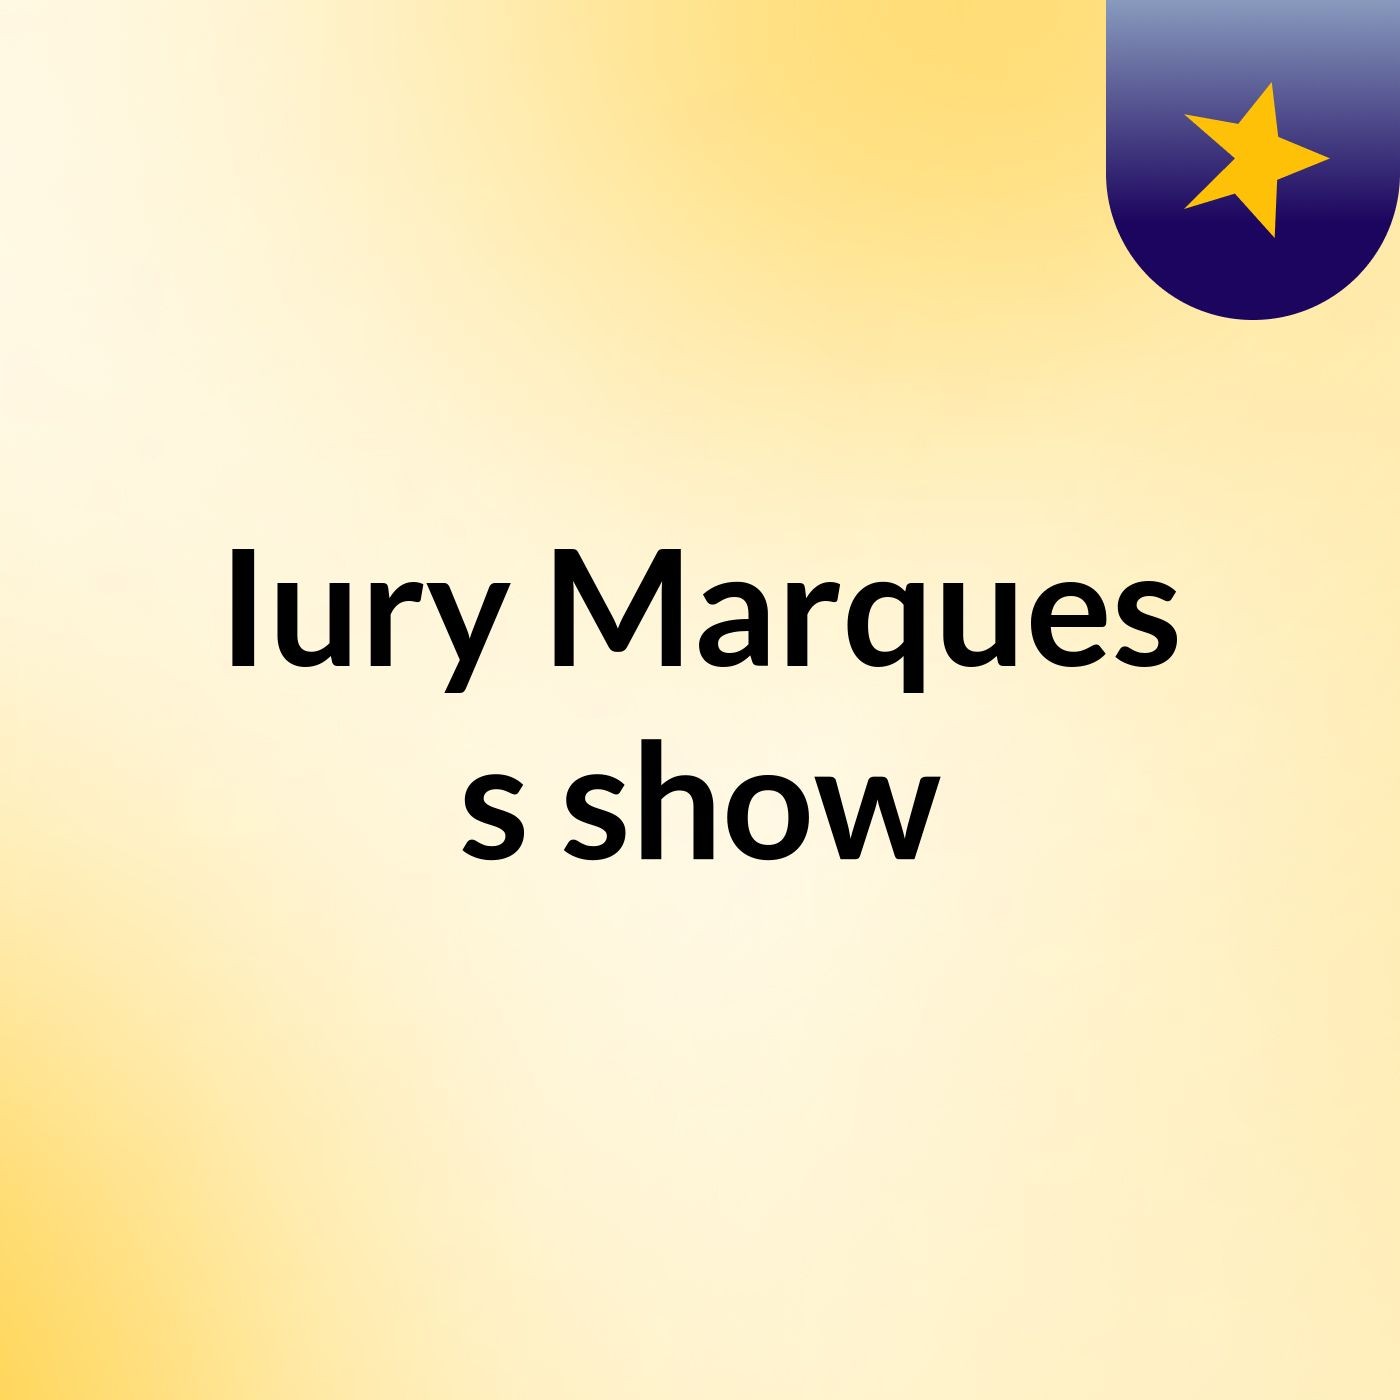 Iury Marques's show